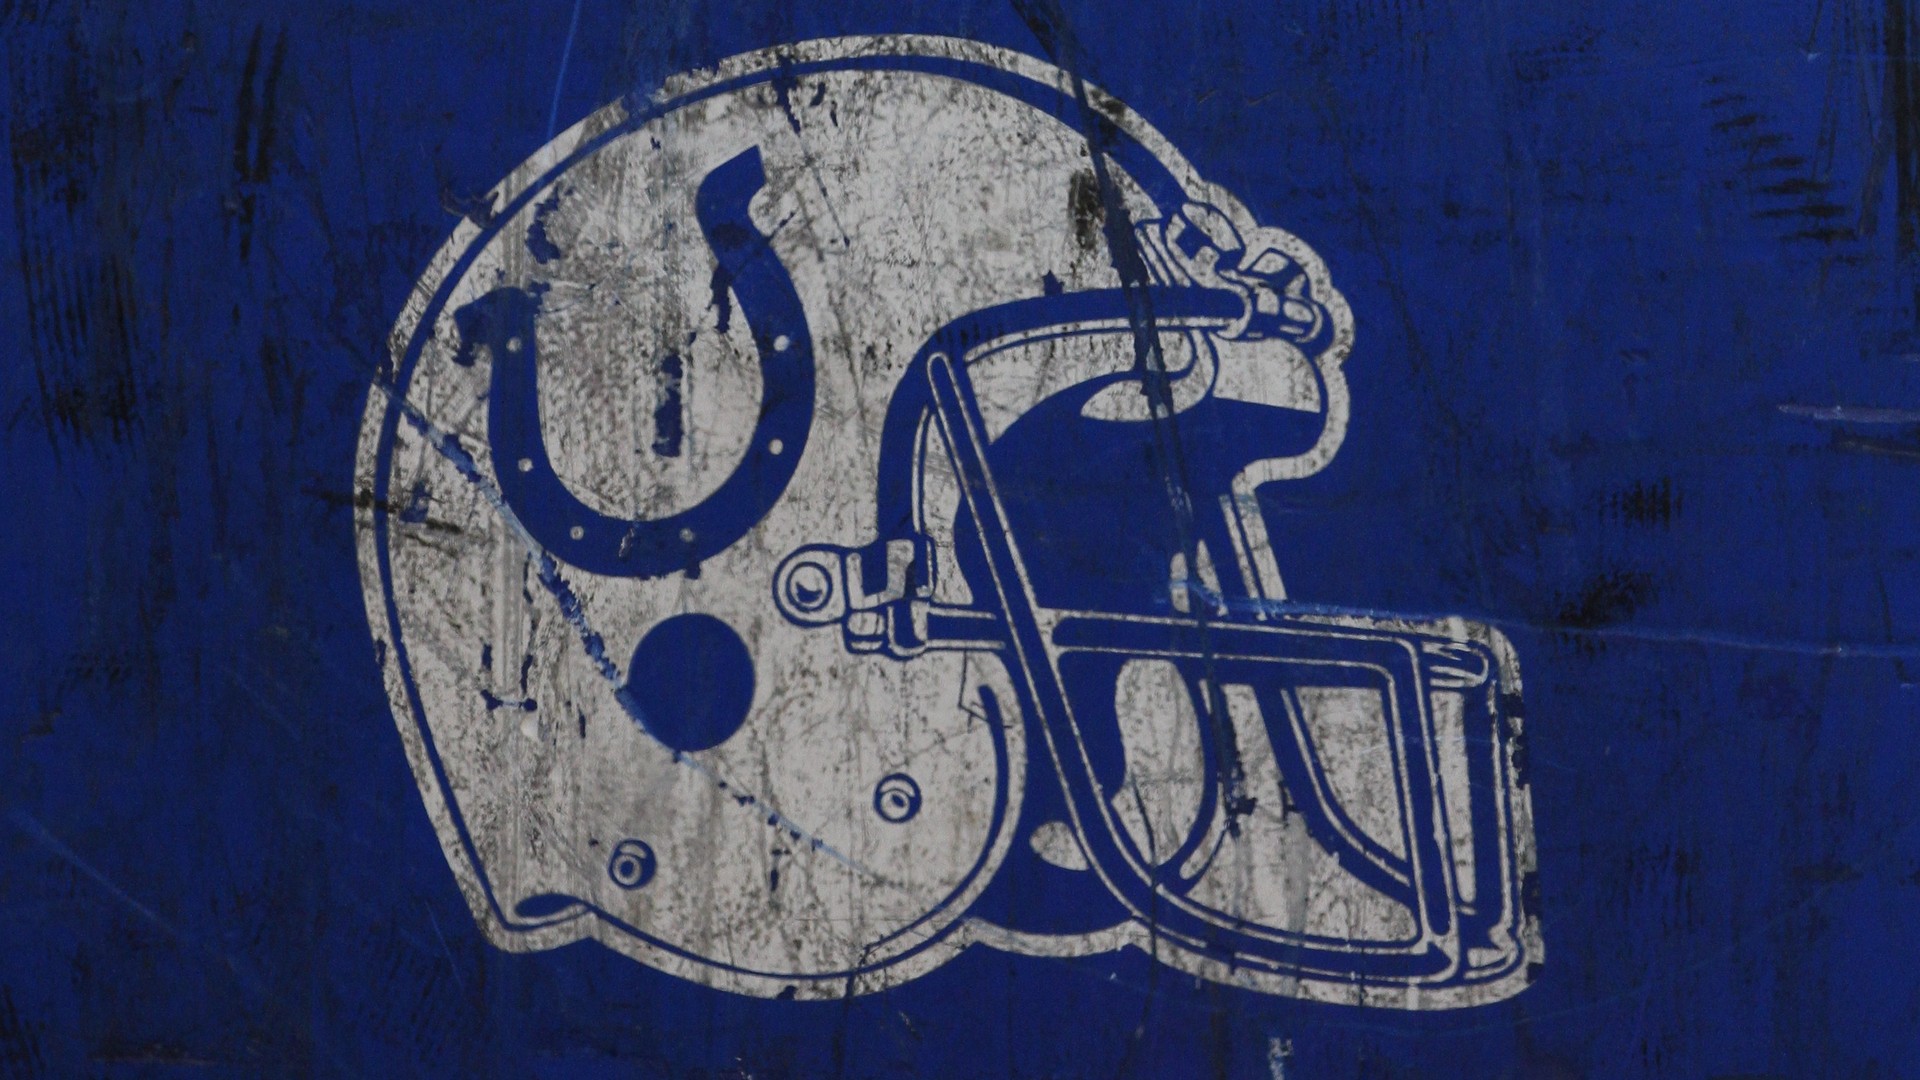 HD Desktop Wallpaper Indianapolis Colts NFL with resolution 1920x1080 pixel. You can make this wallpaper for your Mac or Windows Desktop Background, iPhone, Android or Tablet and another Smartphone device